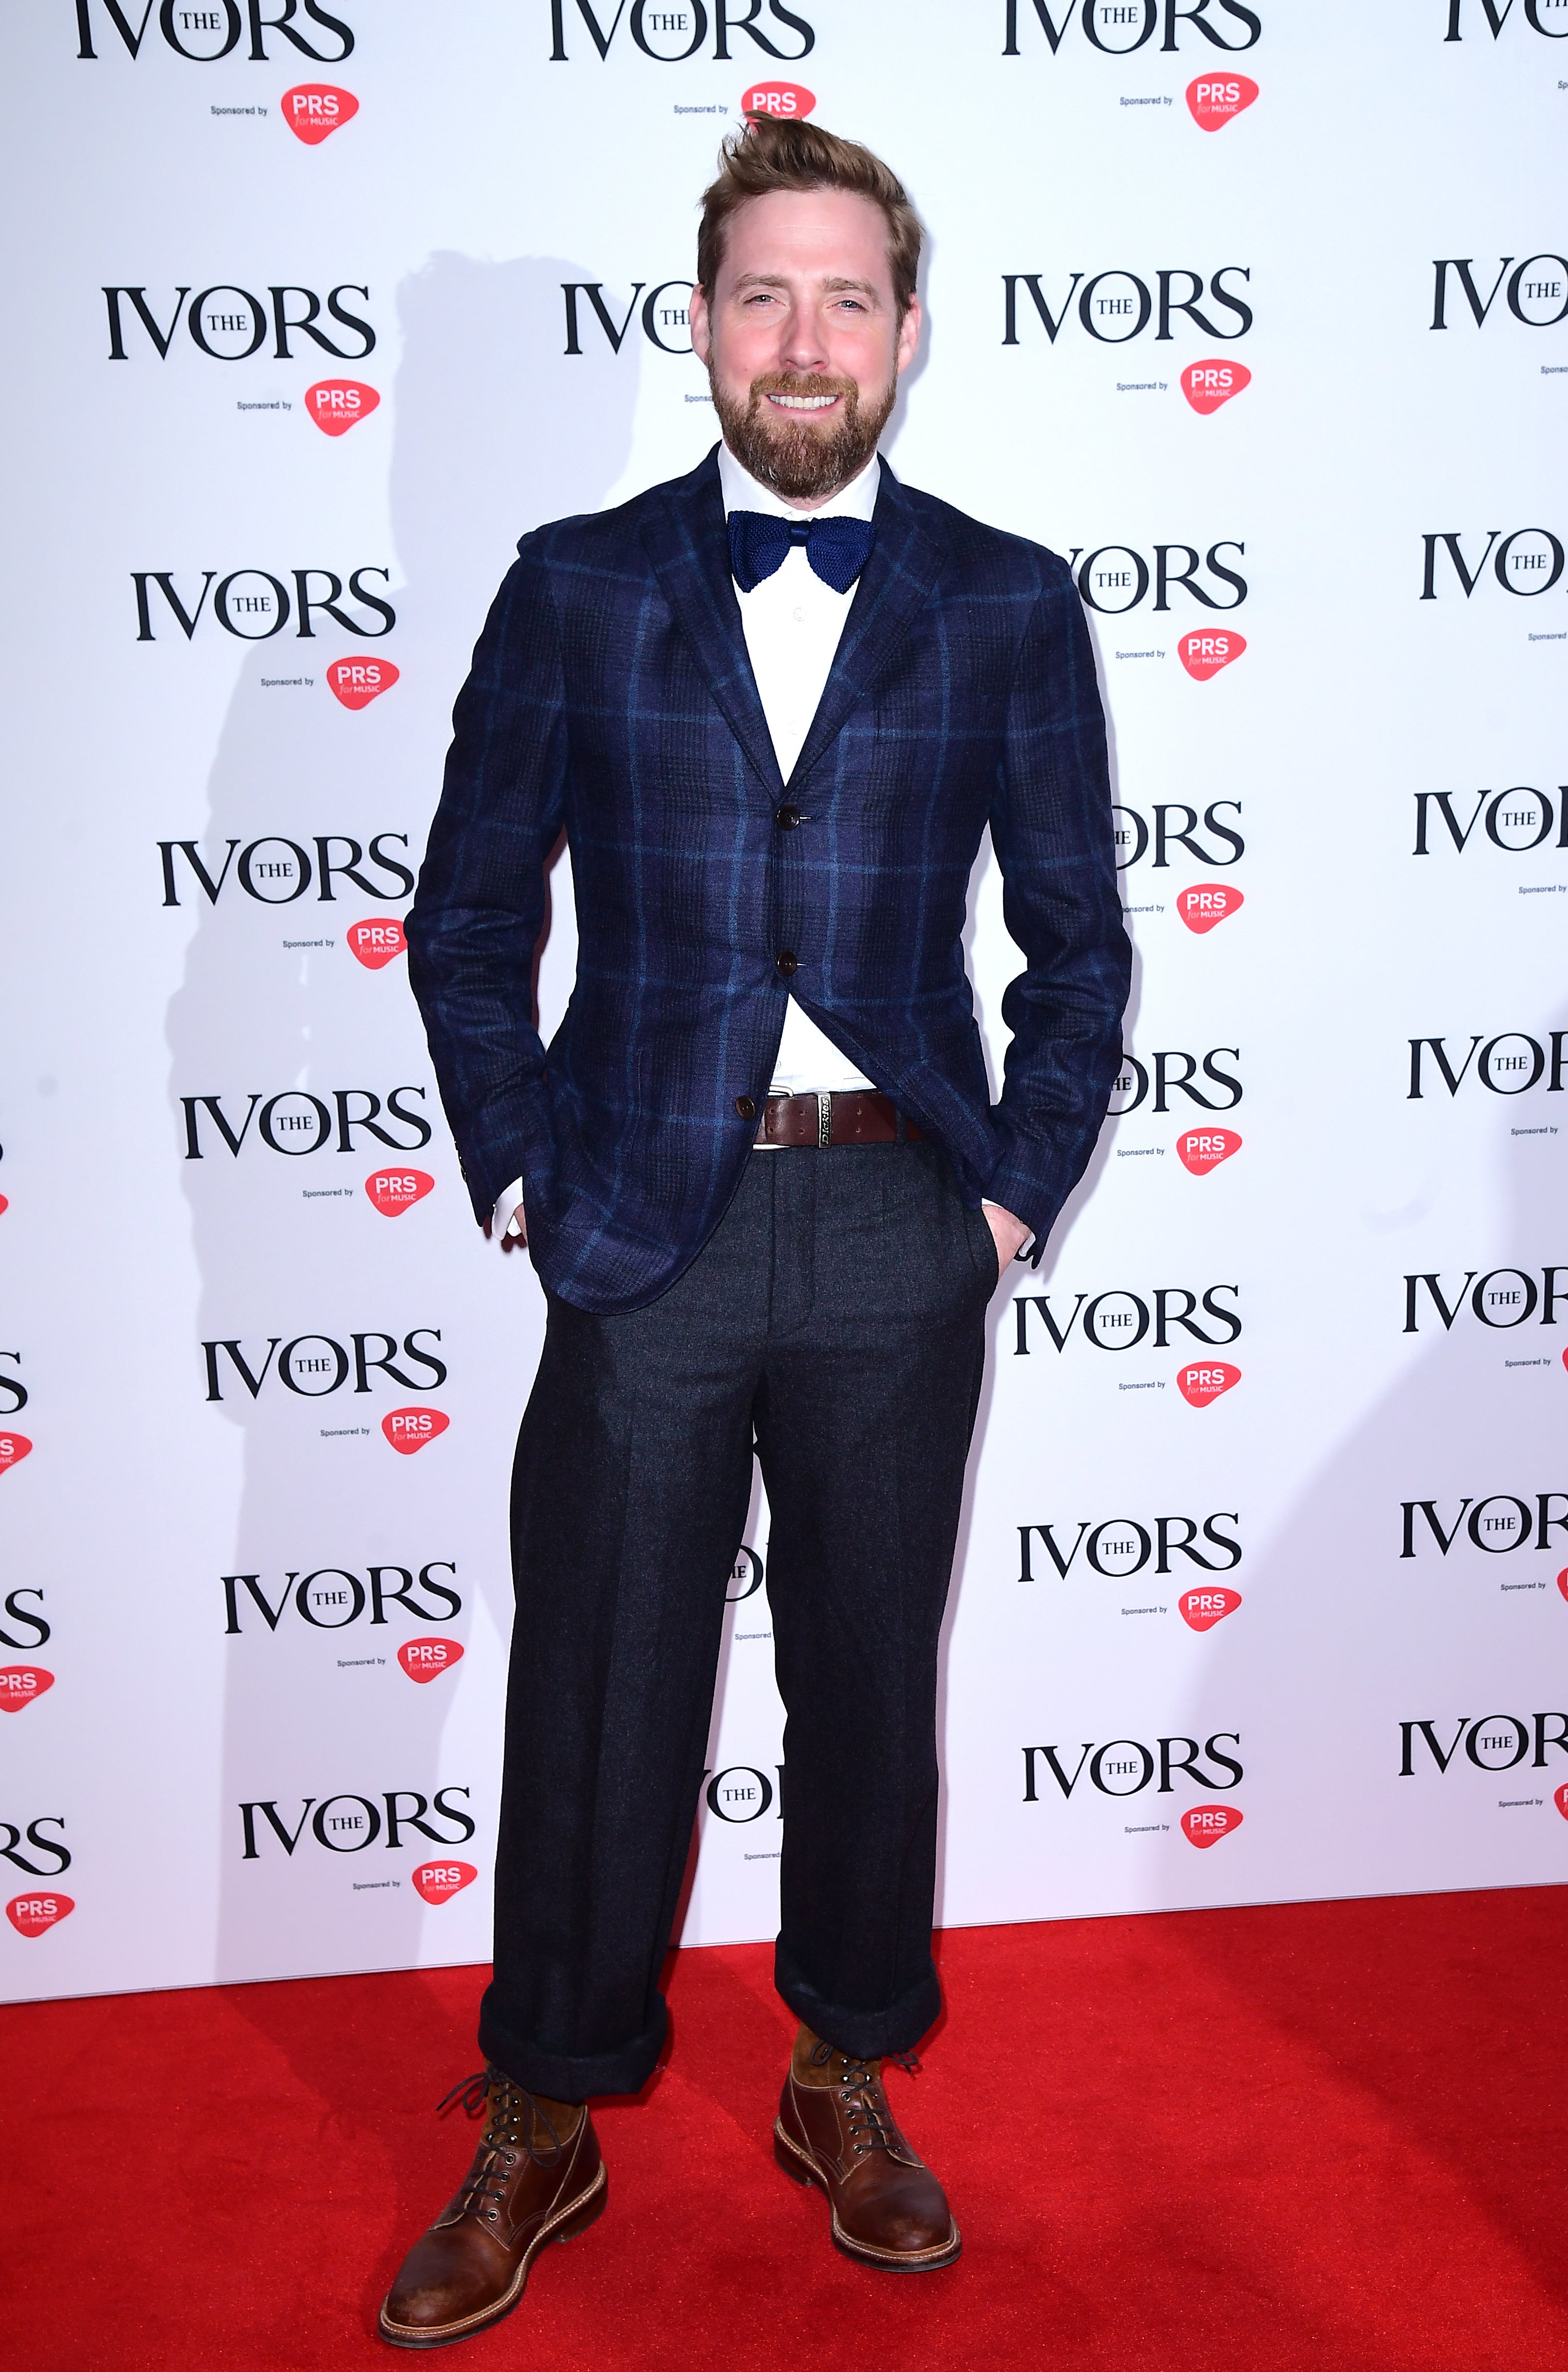 Ricky Wilson during the Annual Ivor Novello Songwriting Awards (Ian West/PA)